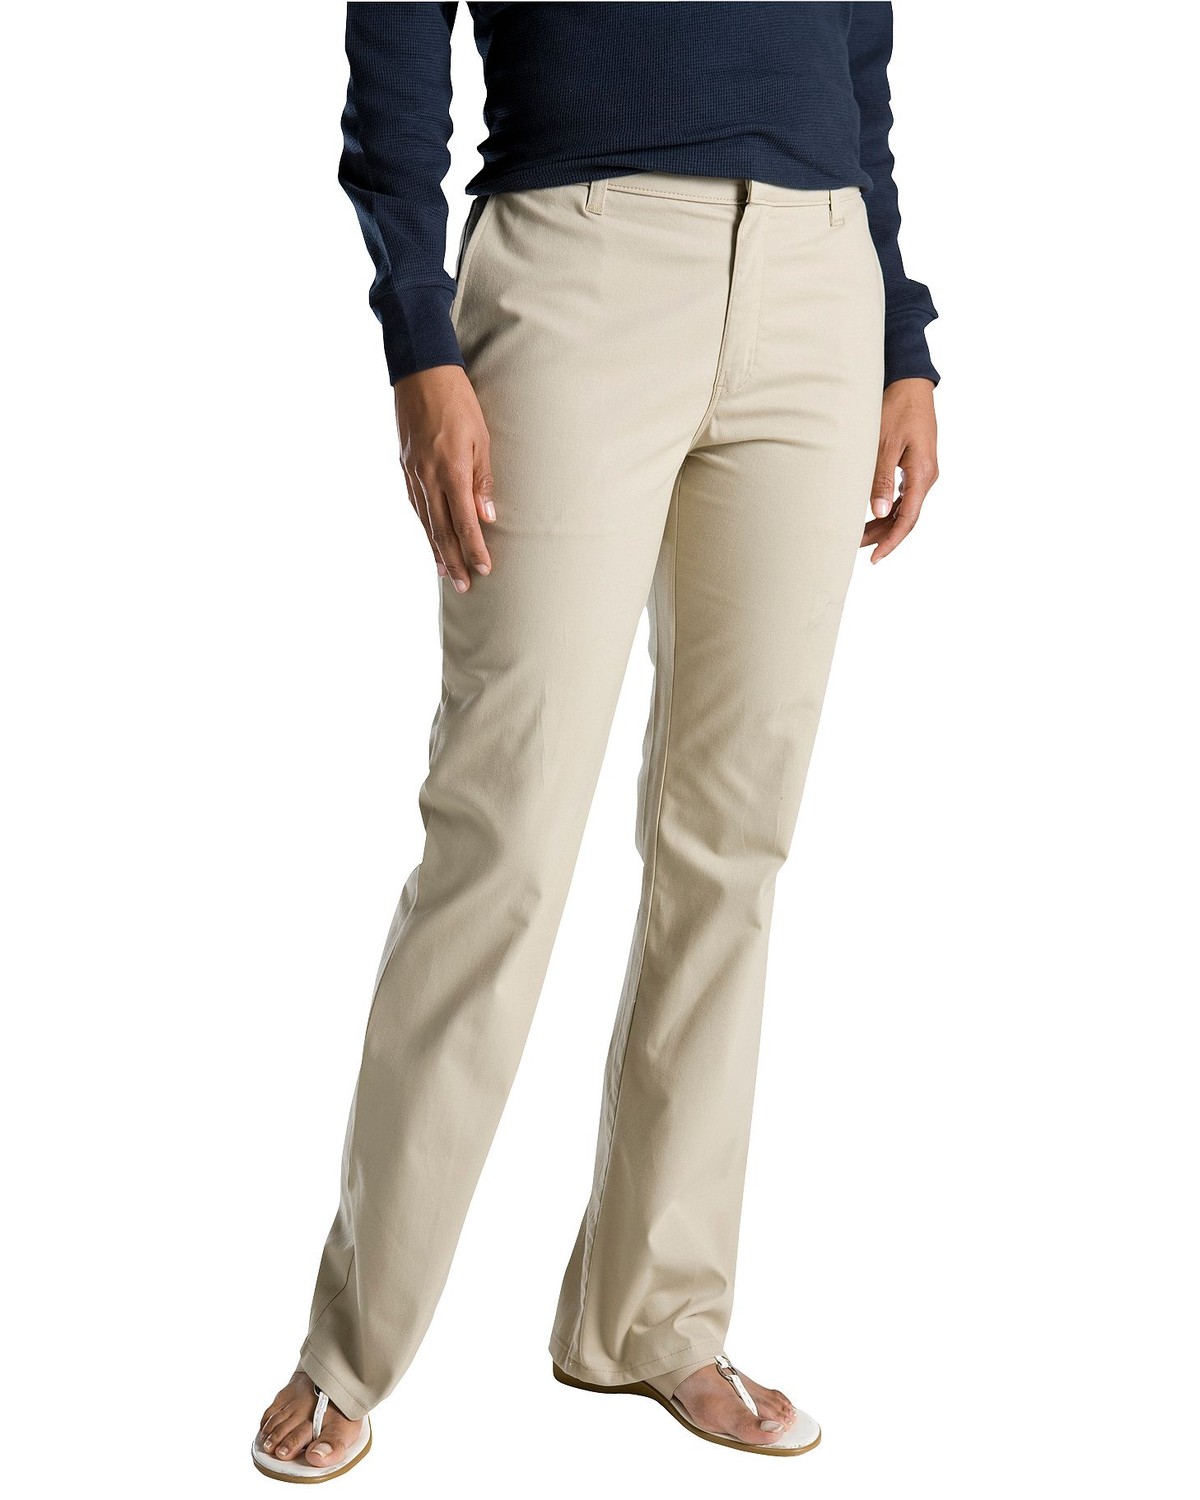 Dickies Women's Flat Front Stretch Twill Pants | Sheplers